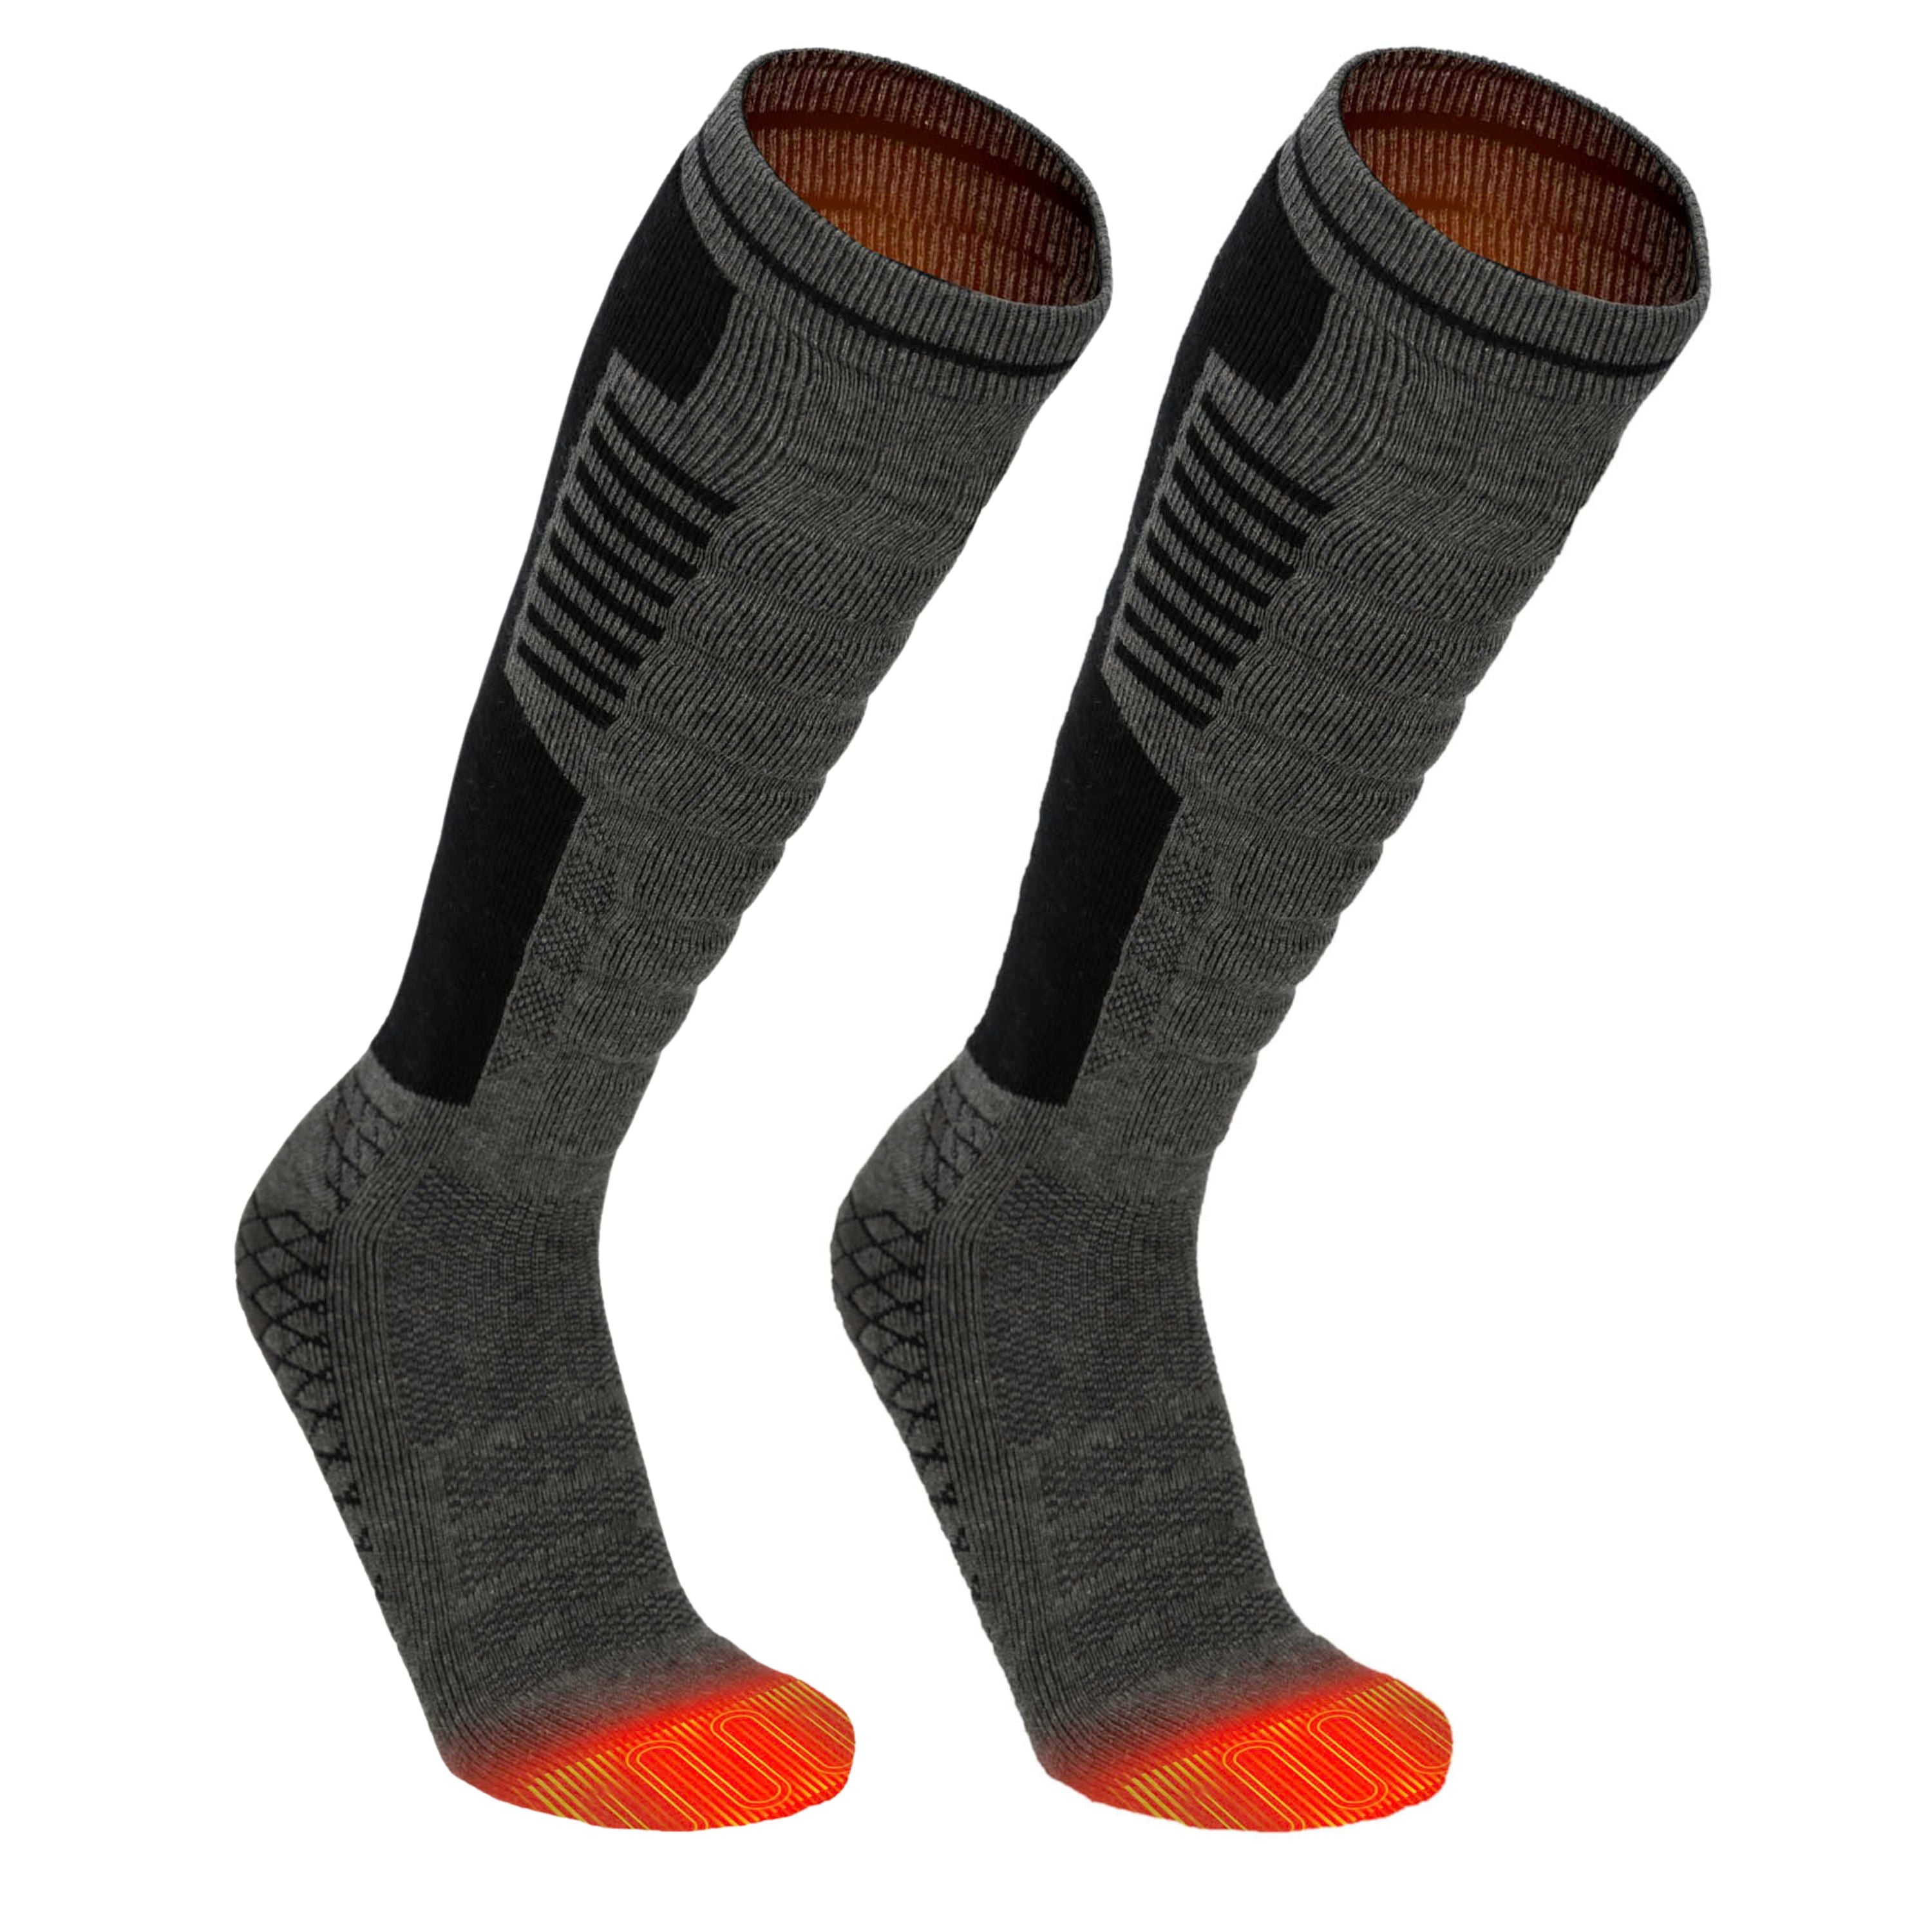 Chaussettes thermales chauffantes - Unisexe